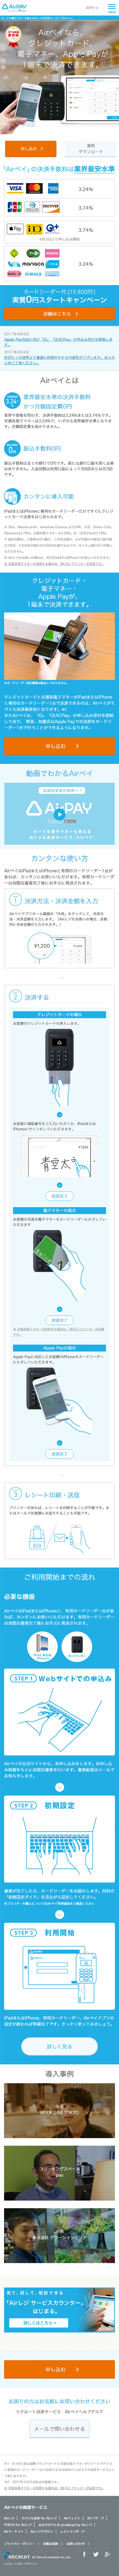 AirPAY_sp_1